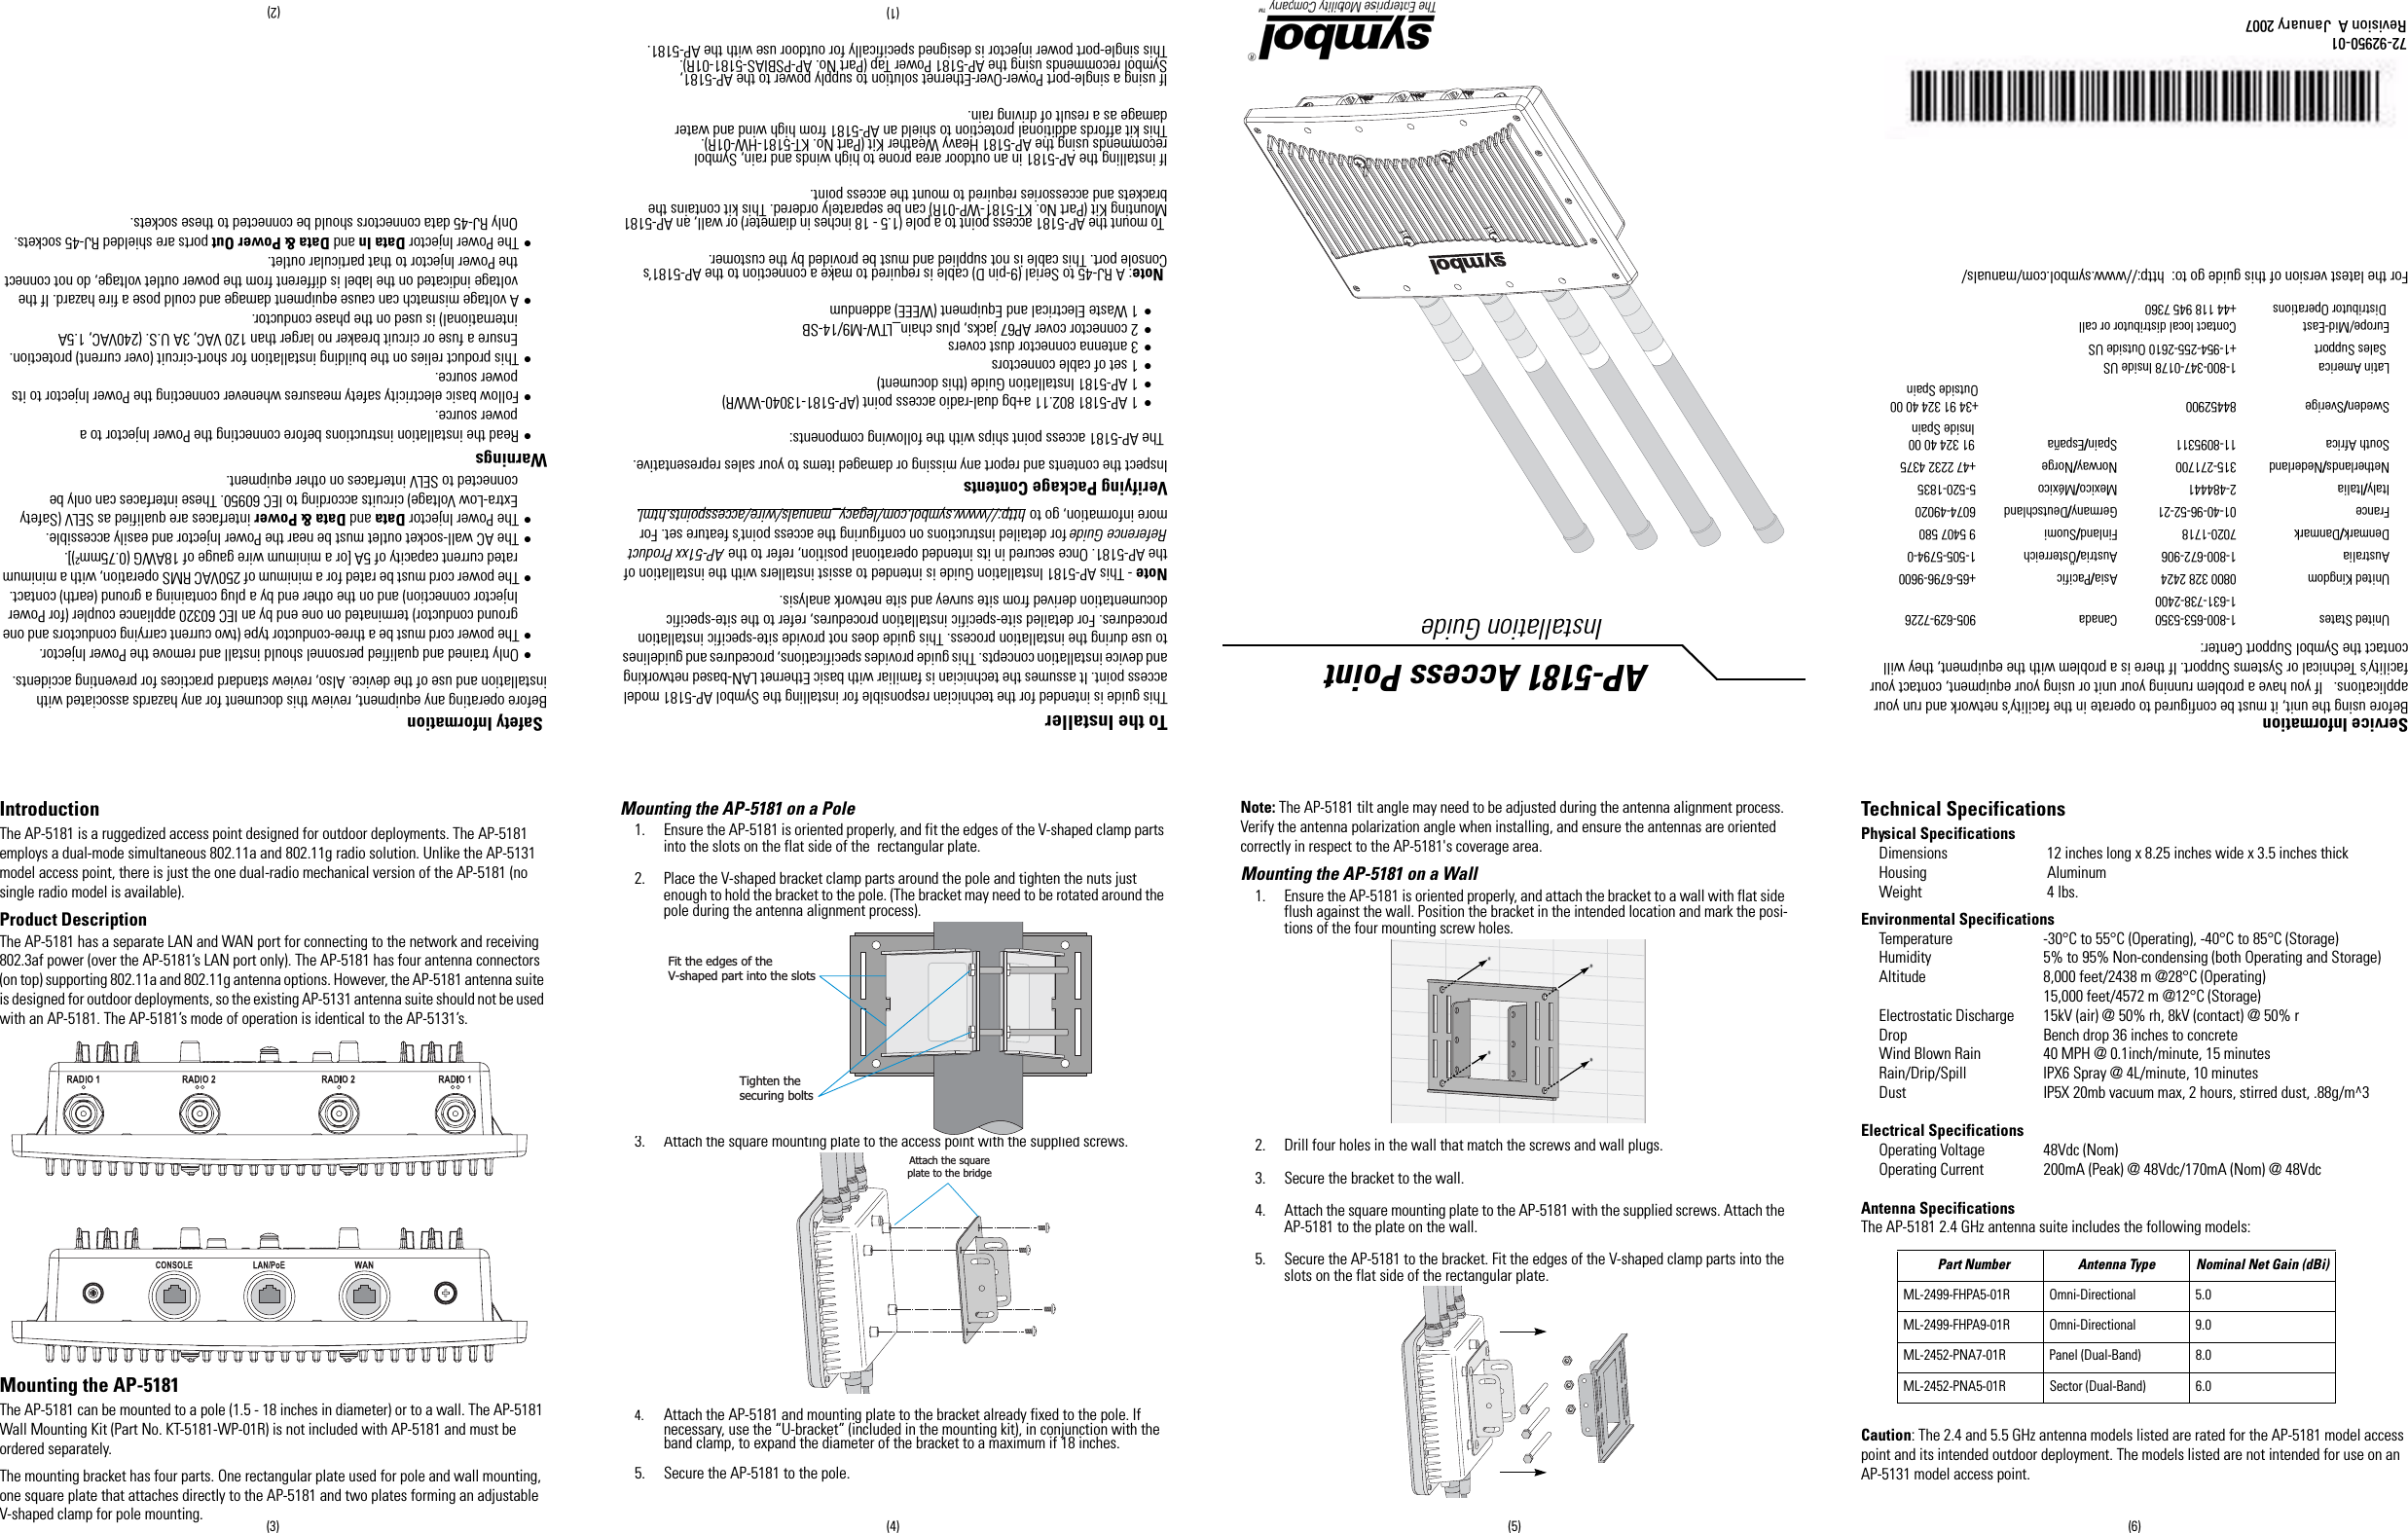 To the InstallerThis guide is intended for the technician responsible for installing the Symbol AP-5181 model access point. It assumes the technician is familiar with basic Ethernet LAN-based networking and device installation concepts. This guide provides specifications, procedures and guidelines to use during the installation process. This guide does not provide site-specific installation procedures. For detailed site-specific installation procedures, refer to the site-specific documentation derived from site survey and site network analysis. Note - This AP-5181 Installation Guide is intended to assist installers with the installation of the AP-5181. Once secured in its intended operational position, refer to the AP-51xx Product Reference Guide for detailed instructions on configuring the access point’s feature set. For more information, go to http://www.symbol.com/legacy_manuals/wire/accesspoints.html.Verifying Package ContentsInspect the contents and report any missing or damaged items to your sales representative. The AP-5181 access point ships with the following components:• 1 AP-5181 802.11 a+bg dual-radio access point (AP-5181-13040-WWR)• 1 AP-5181 Installation Guide (this document) • 1 set of cable connectors• 3 antenna connector dust covers• 2 connector cover AP67 jacks, plus chain_LTW-M9/14-SB• 1 Waste Electrical and Equipment (WEEE) addendum Note: A RJ-45 to Serial (9-pin D) cable is required to make a connection to the AP-5181’s Console port. This cable is not supplied and must be provided by the customer.  To mount the AP-5181 access point to a pole (1.5 - 18 inches in diameter) or wall, an AP-5181 Mounting Kit (Part No. KT-5181-WP-01R) can be separately ordered. This kit contains thebrackets and accessories required to mount the access point.If installing the AP-5181 in an outdoor area prone to high winds and rain, Symbolrecommends using the AP-5181 Heavy Weather Kit (Part No. KT-5181-HW-01R). This kit affords additional protection to shield an AP-5181 from high wind and waterdamage as a result of driving rain.If using a single-port Power-Over-Ethernet solution to supply power to the AP-5181,Symbol recommends using the AP-5181 Power Tap (Part No. AP-PSBIAS-5181-01R). This single-port power injector is designed specifically for outdoor use with the AP-5181. Safety InformationBefore operating any equipment, review this document for any hazards associated with installation and use of the device. Also, review standard practices for preventing accidents.• Only trained and qualified personnel should install and remove the Power Injector.• The power cord must be a three-conductor type (two current carrying conductors and one ground conductor) terminated on one end by an IEC 60320 appliance coupler (for Power Injector connection) and on the other end by a plug containing a ground (earth) contact.• The power cord must be rated for a minimum of 250VAC RMS operation, with a minimum rated current capacity of 5A [or a minimum wire gauge of 18AWG (0.75mm²)].• The AC wall-socket outlet must be near the Power Injector and easily accessible.• The Power Injector Data and Data &amp; Power interfaces are qualified as SELV (Safety Extra-Low Voltage) circuits according to IEC 60950. These interfaces can only be connected to SELV interfaces on other equipment. Warnings• Read the installation instructions before connecting the Power Injector to a power source.• Follow basic electricity safety measures whenever connecting the Power Injector to its power source. • This product relies on the building installation for short-circuit (over current) protection. Ensure a fuse or circuit breaker no larger than 120 VAC, 3A U.S. (240VAC, 1.5A international) is used on the phase conductor.• A voltage mismatch can cause equipment damage and could pose a fire hazard. If the voltage indicated on the label is different from the power outlet voltage, do not connect the Power Injector to that particular outlet.• The Power Injector Data In and Data &amp; Power Out ports are shielded RJ-45 sockets. Only RJ-45 data connectors should be connected to these sockets.Service InformationBefore using the unit, it must be configured to operate in the facility’s network and run your applications.   If you have a problem running your unit or using your equipment, contact your facility’s Technical or Systems Support. If there is a problem with the equipment, they will contact the Symbol Support Center:For the latest version of this guide go to:  http://www.symbol.com/manuals/United States 1-800-653-53501-631-738-2400Canada 905-629-7226United Kingdom 0800 328 2424  Asia/Pacific +65-6796-9600 Australia 1-800-672-906 Austria/Österreich 1-505-5794-0Denmark/Danmark 7020-1718 Finland/Suomi 9 5407 580France 01-40-96-52-21 Germany/Deutschland 6074-49020Italy/Italia 2-484441 Mexico/México 5-520-1835Netherlands/Nederland 315-271700 Norway/Norge +47 2232 4375South Africa 11-8095311 Spain/España  91 324 40 00 Inside SpainSweden/Sverige 84452900 +34 91 324 40 00Outside SpainLatin America Sales Support1-800-347-0178 Inside US+1-954-255-2610 Outside USEurope/Mid-East Distributor OperationsContact local distributor or call+44 118 945 7360AP-5181 Access Point Installation Guide72-92950-01Revision A  January 2007 (2)(1)(3) (4) (5) (6)IntroductionThe AP-5181 is a ruggedized access point designed for outdoor deployments. The AP-5181 employs a dual-mode simultaneous 802.11a and 802.11g radio solution. Unlike the AP-5131 model access point, there is just the one dual-radio mechanical version of the AP-5181 (no single radio model is available).Product DescriptionThe AP-5181 has a separate LAN and WAN port for connecting to the network and receiving 802.3af power (over the AP-5181’s LAN port only). The AP-5181 has four antenna connectors (on top) supporting 802.11a and 802.11g antenna options. However, the AP-5181 antenna suite is designed for outdoor deployments, so the existing AP-5131 antenna suite should not be used with an AP-5181. The AP-5181’s mode of operation is identical to the AP-5131’s.Mounting the AP-5181 The AP-5181 can be mounted to a pole (1.5 - 18 inches in diameter) or to a wall. The AP-5181 Wall Mounting Kit (Part No. KT-5181-WP-01R) is not included with AP-5181 and must be ordered separately.The mounting bracket has four parts. One rectangular plate used for pole and wall mounting, one square plate that attaches directly to the AP-5181 and two plates forming an adjustable V-shaped clamp for pole mounting.Mounting the AP-5181 on a Pole 1. Ensure the AP-5181 is oriented properly, and fit the edges of the V-shaped clamp parts into the slots on the flat side of the  rectangular plate.2. Place the V-shaped bracket clamp parts around the pole and tighten the nuts just enough to hold the bracket to the pole. (The bracket may need to be rotated around the pole during the antenna alignment process). 3. Attach the square mounting plate to the access point with the supplied screws.  4. Attach the AP-5181 and mounting plate to the bracket already fixed to the pole. If necessary, use the “U-bracket” (included in the mounting kit), in conjunction with the band clamp, to expand the diameter of the bracket to a maximum if 18 inches.5. Secure the AP-5181 to the pole.Note: The AP-5181 tilt angle may need to be adjusted during the antenna alignment process. Verify the antenna polarization angle when installing, and ensure the antennas are oriented correctly in respect to the AP-5181&apos;s coverage area.Mounting the AP-5181 on a Wall 1. Ensure the AP-5181 is oriented properly, and attach the bracket to a wall with flat side flush against the wall. Position the bracket in the intended location and mark the posi-tions of the four mounting screw holes.   2. Drill four holes in the wall that match the screws and wall plugs.3. Secure the bracket to the wall.4. Attach the square mounting plate to the AP-5181 with the supplied screws. Attach the AP-5181 to the plate on the wall.5. Secure the AP-5181 to the bracket. Fit the edges of the V-shaped clamp parts into the slots on the flat side of the rectangular plate.Technical Specifications Physical SpecificationsDimensions  12 inches long x 8.25 inches wide x 3.5 inches thick Housing  AluminumWeight  4 lbs.Environmental SpecificationsTemperature -30°C to 55°C (Operating), -40°C to 85°C (Storage)Humidity  5% to 95% Non-condensing (both Operating and Storage)Altitude 8,000 feet/2438 m @28°C (Operating)    15,000 feet/4572 m @12°C (Storage) Electrostatic Discharge 15kV (air) @ 50% rh, 8kV (contact) @ 50% r Drop Bench drop 36 inches to concreteWind Blown Rain 40 MPH @ 0.1inch/minute, 15 minutesRain/Drip/Spill IPX6 Spray @ 4L/minute, 10 minutesDust IP5X 20mb vacuum max, 2 hours, stirred dust, .88g/m^3 Electrical SpecificationsOperating Voltage  48Vdc (Nom)Operating Current 200mA (Peak) @ 48Vdc/170mA (Nom) @ 48VdcAntenna SpecificationsThe AP-5181 2.4 GHz antenna suite includes the following models: Caution: The 2.4 and 5.5 GHz antenna models listed are rated for the AP-5181 model access point and its intended outdoor deployment. The models listed are not intended for use on an AP-5131 model access point.Fit the edges of theV-shaped part into the slotsTighten thesecuring boltsAttach the squareplate to the bridge  Part Number Antenna Type Nominal Net Gain (dBi)ML-2499-FHPA5-01R Omni-Directional 5.0ML-2499-FHPA9-01R Omni-Directional 9.0ML-2452-PNA7-01R Panel (Dual-Band) 8.0ML-2452-PNA5-01R Sector (Dual-Band) 6.0